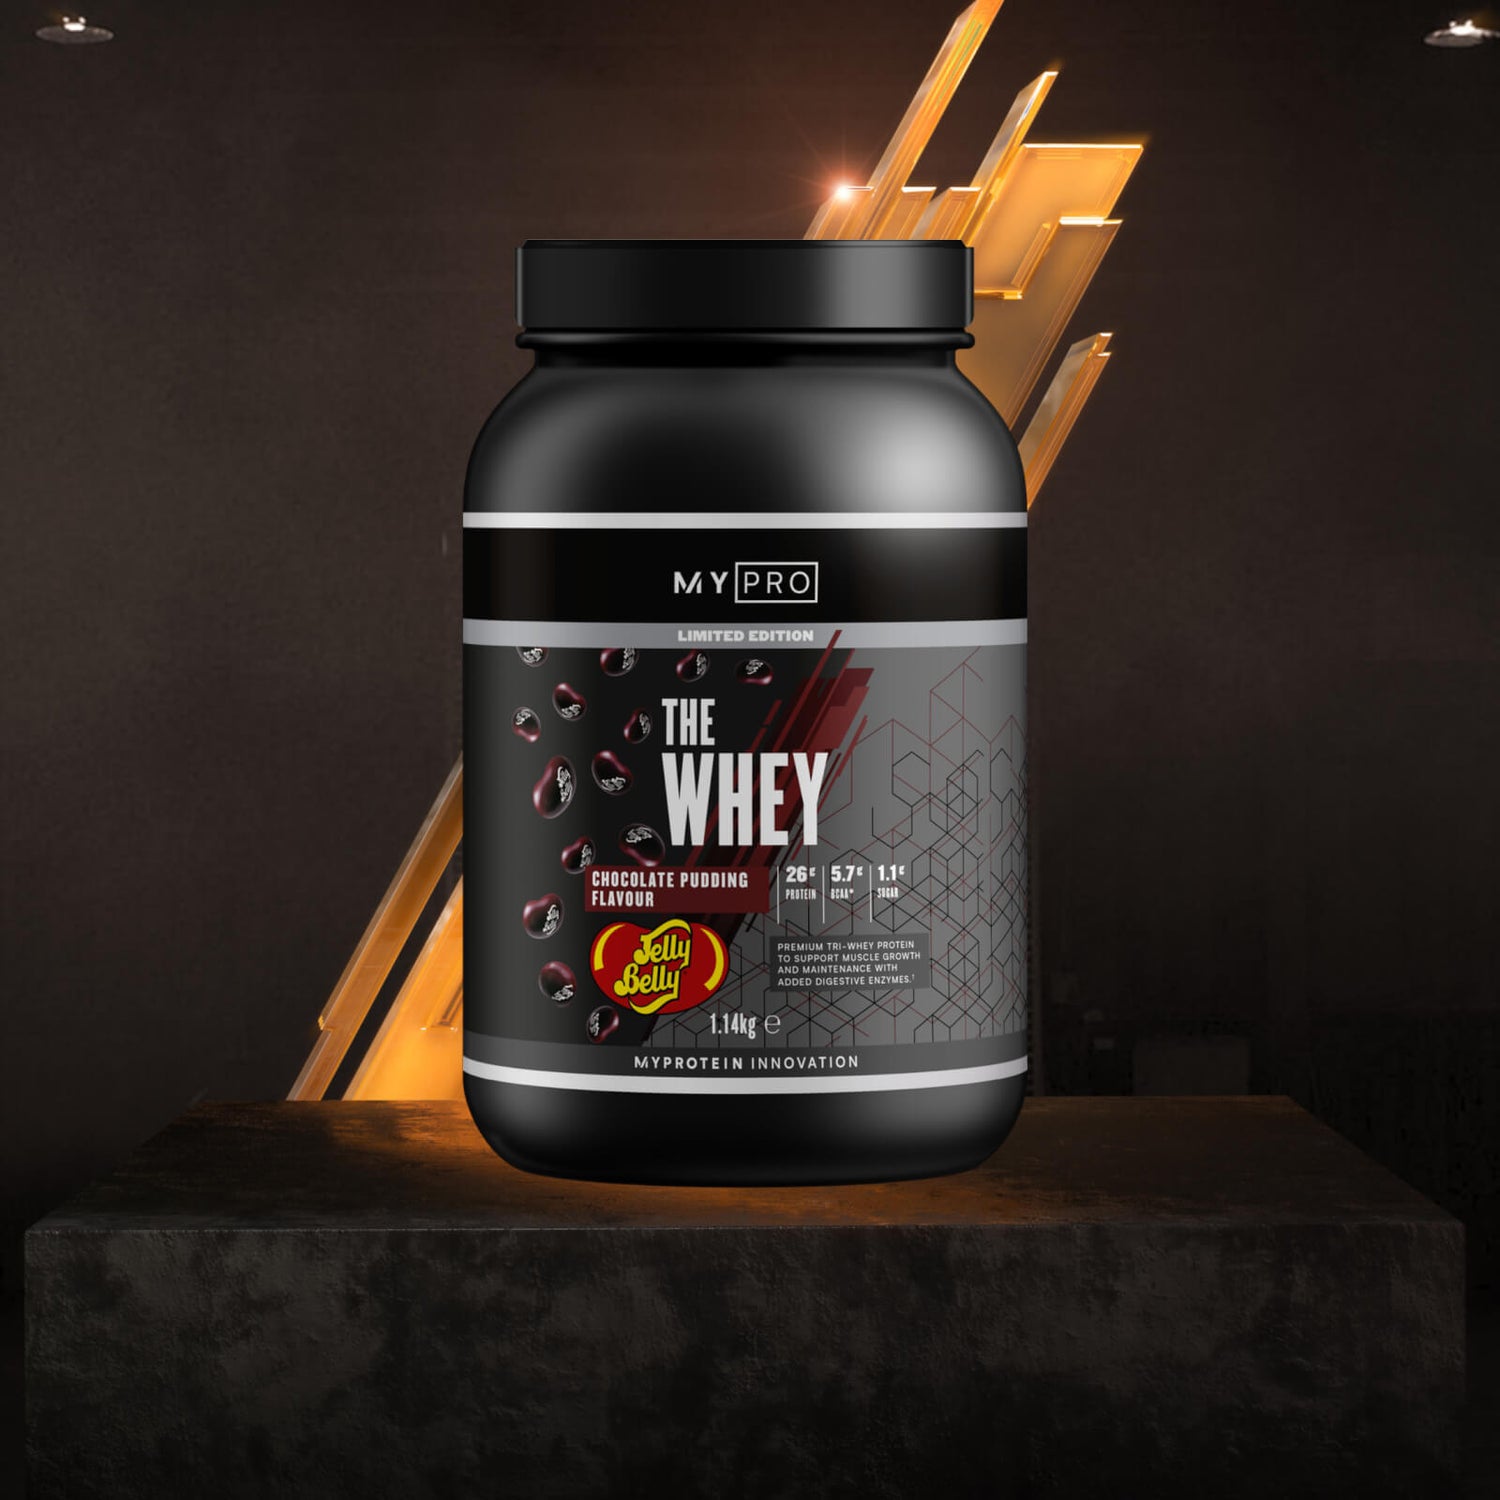 Сывороточный протеин THE Whey - 30servings - Jelly Belly - Chocolate Pudding